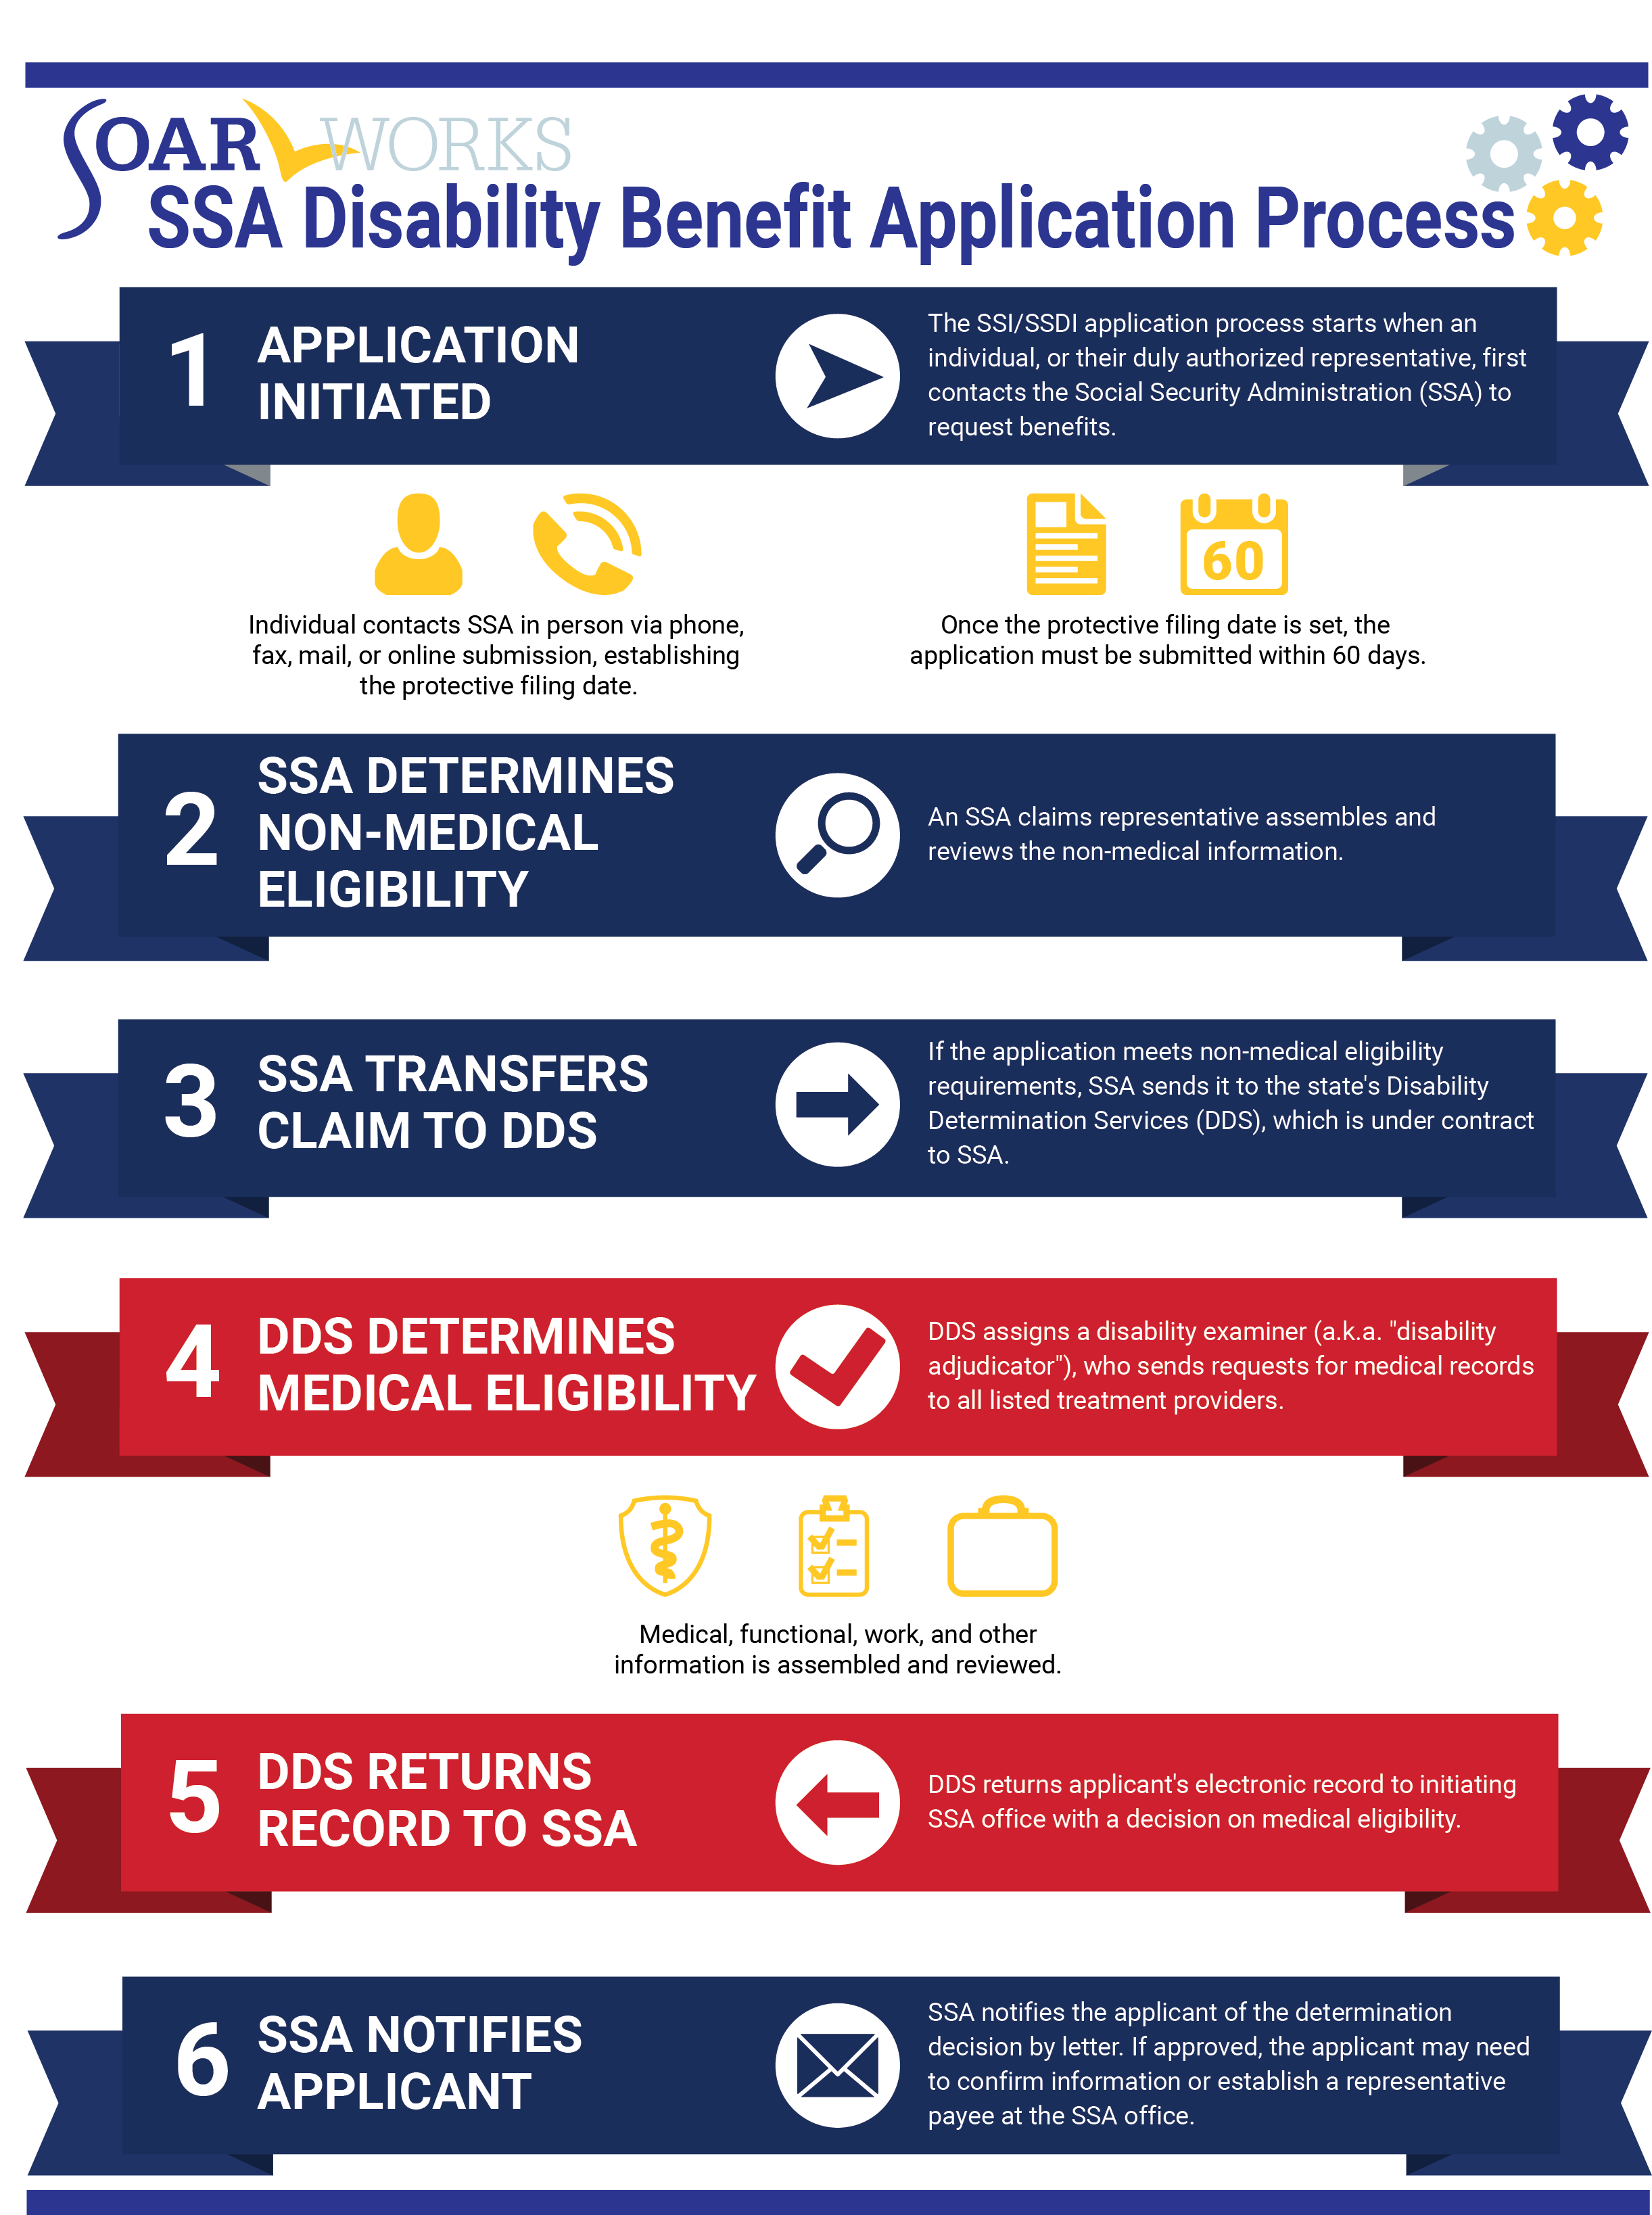 SSA Disability Approval Process